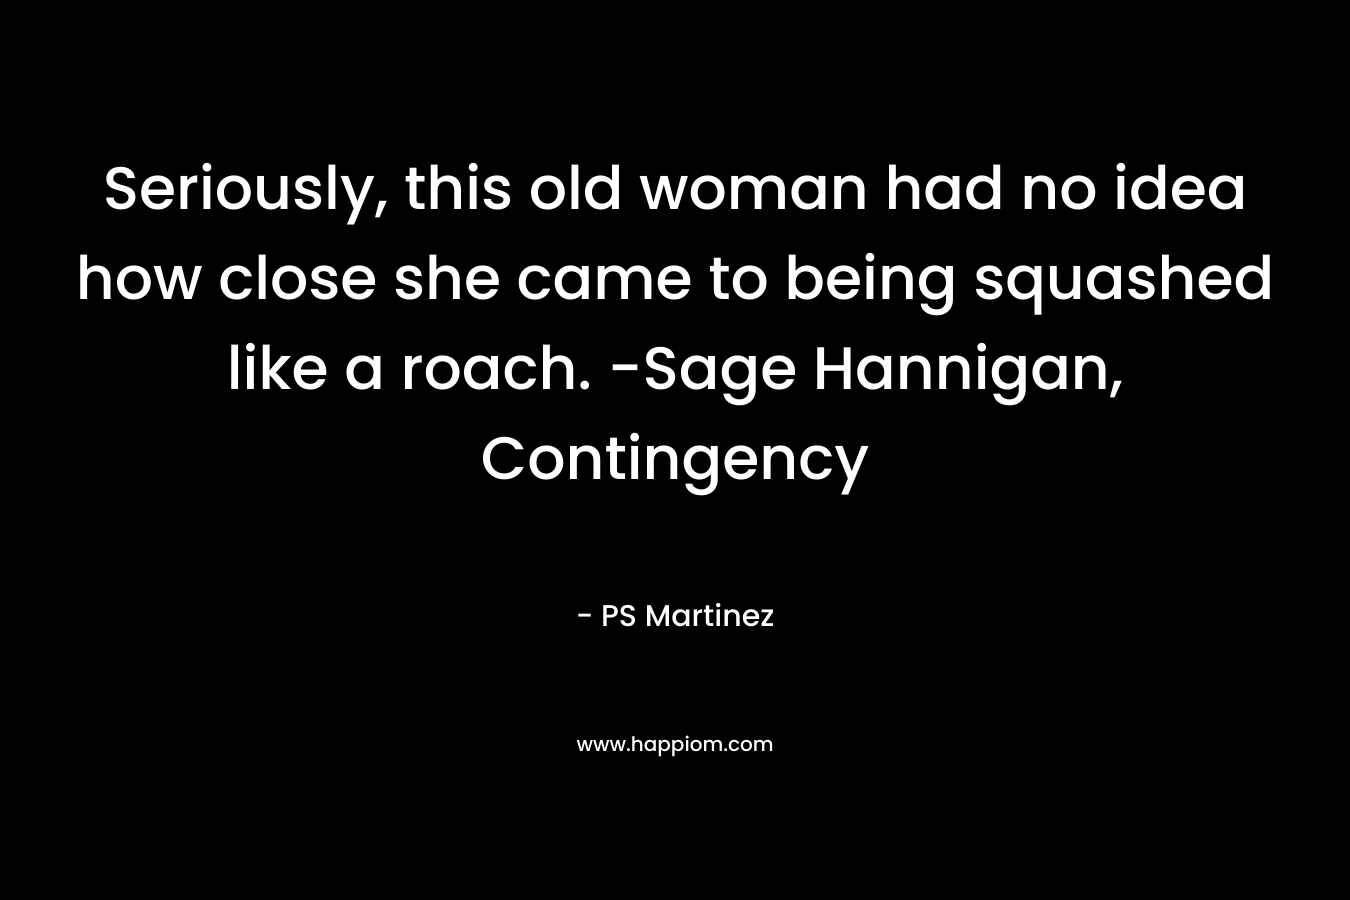 Seriously, this old woman had no idea how close she came to being squashed like a roach. -Sage Hannigan, Contingency – PS Martinez